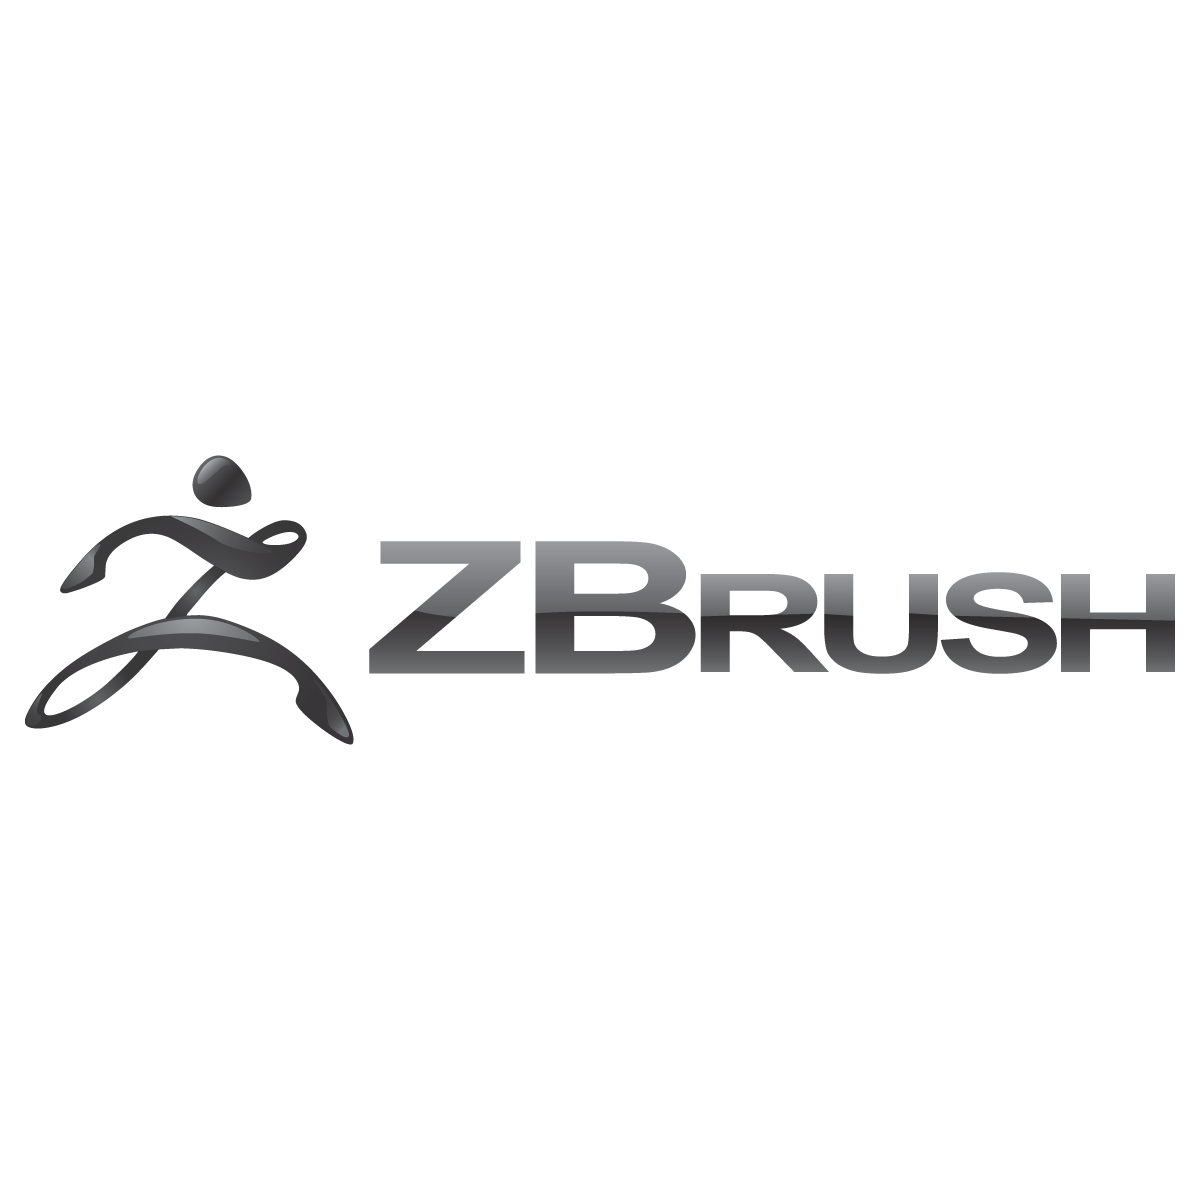 ZBrush Logo - ZBrush Logo Vector. Free Vector Silhouette Graphics AI EPS SVG PNG